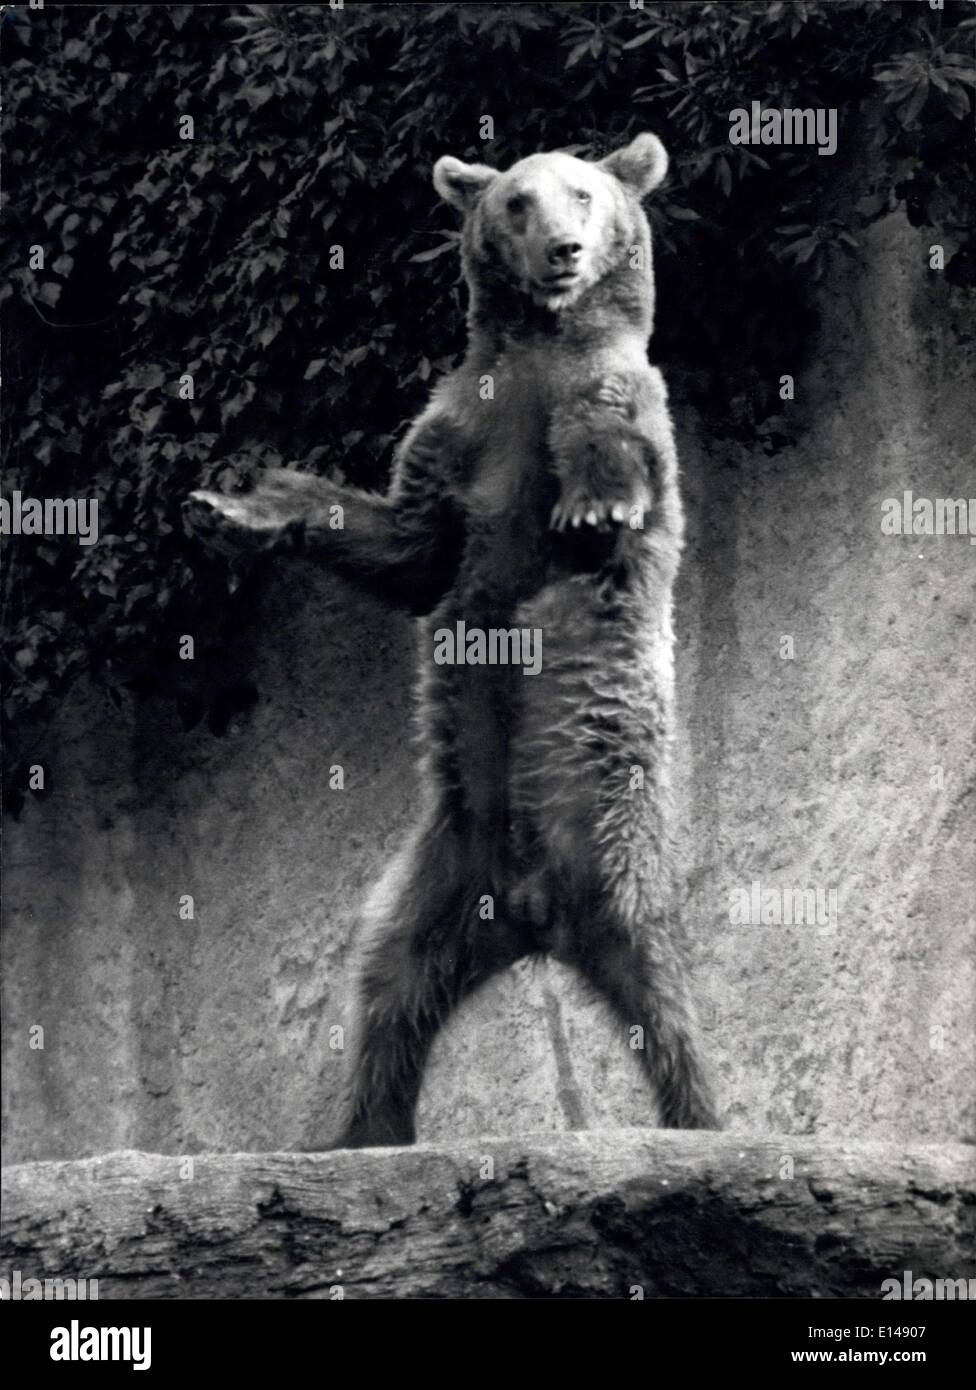 Apr. 17, 2012 - The time in Rome is now very cold and the animals that live in the Zoo ract in different manners as their different aptitudes that they have inherited by their ancestors. Photo shows give, give me the foods, asks the brown bear. Stock Photo